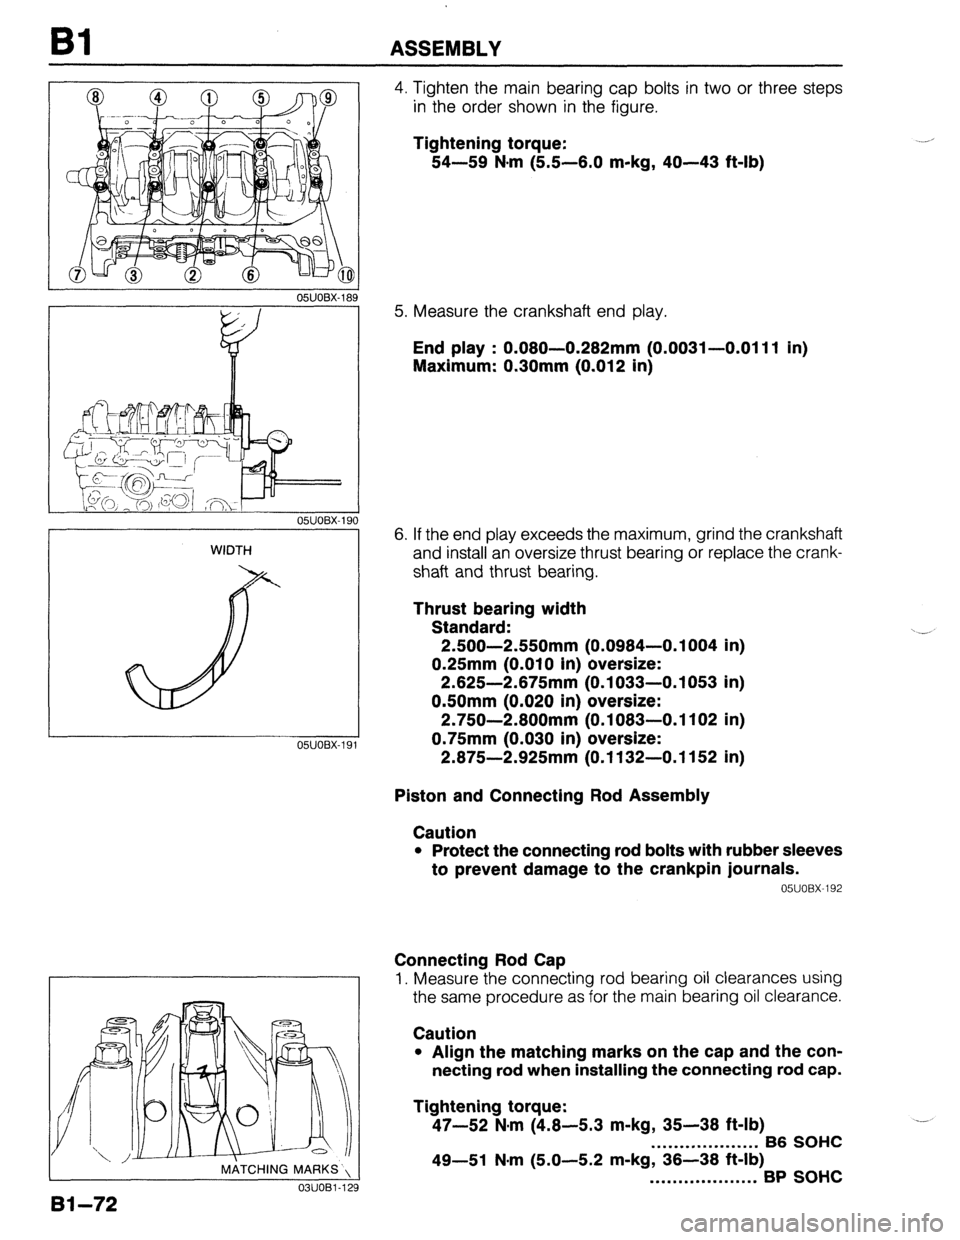 MAZDA PROTEGE 1992  Workshop Manual Bl ASSEMBLY 
05UOBX-18s 
WIDTH 
05lJOBX-l! 
, MATCHING MARKS’, 
03UOBl-1; 
4. Tighten the main bearing cap bolts in two or three steps 
in the order shown in the figure. 
Tightening torque: 
54-59 N